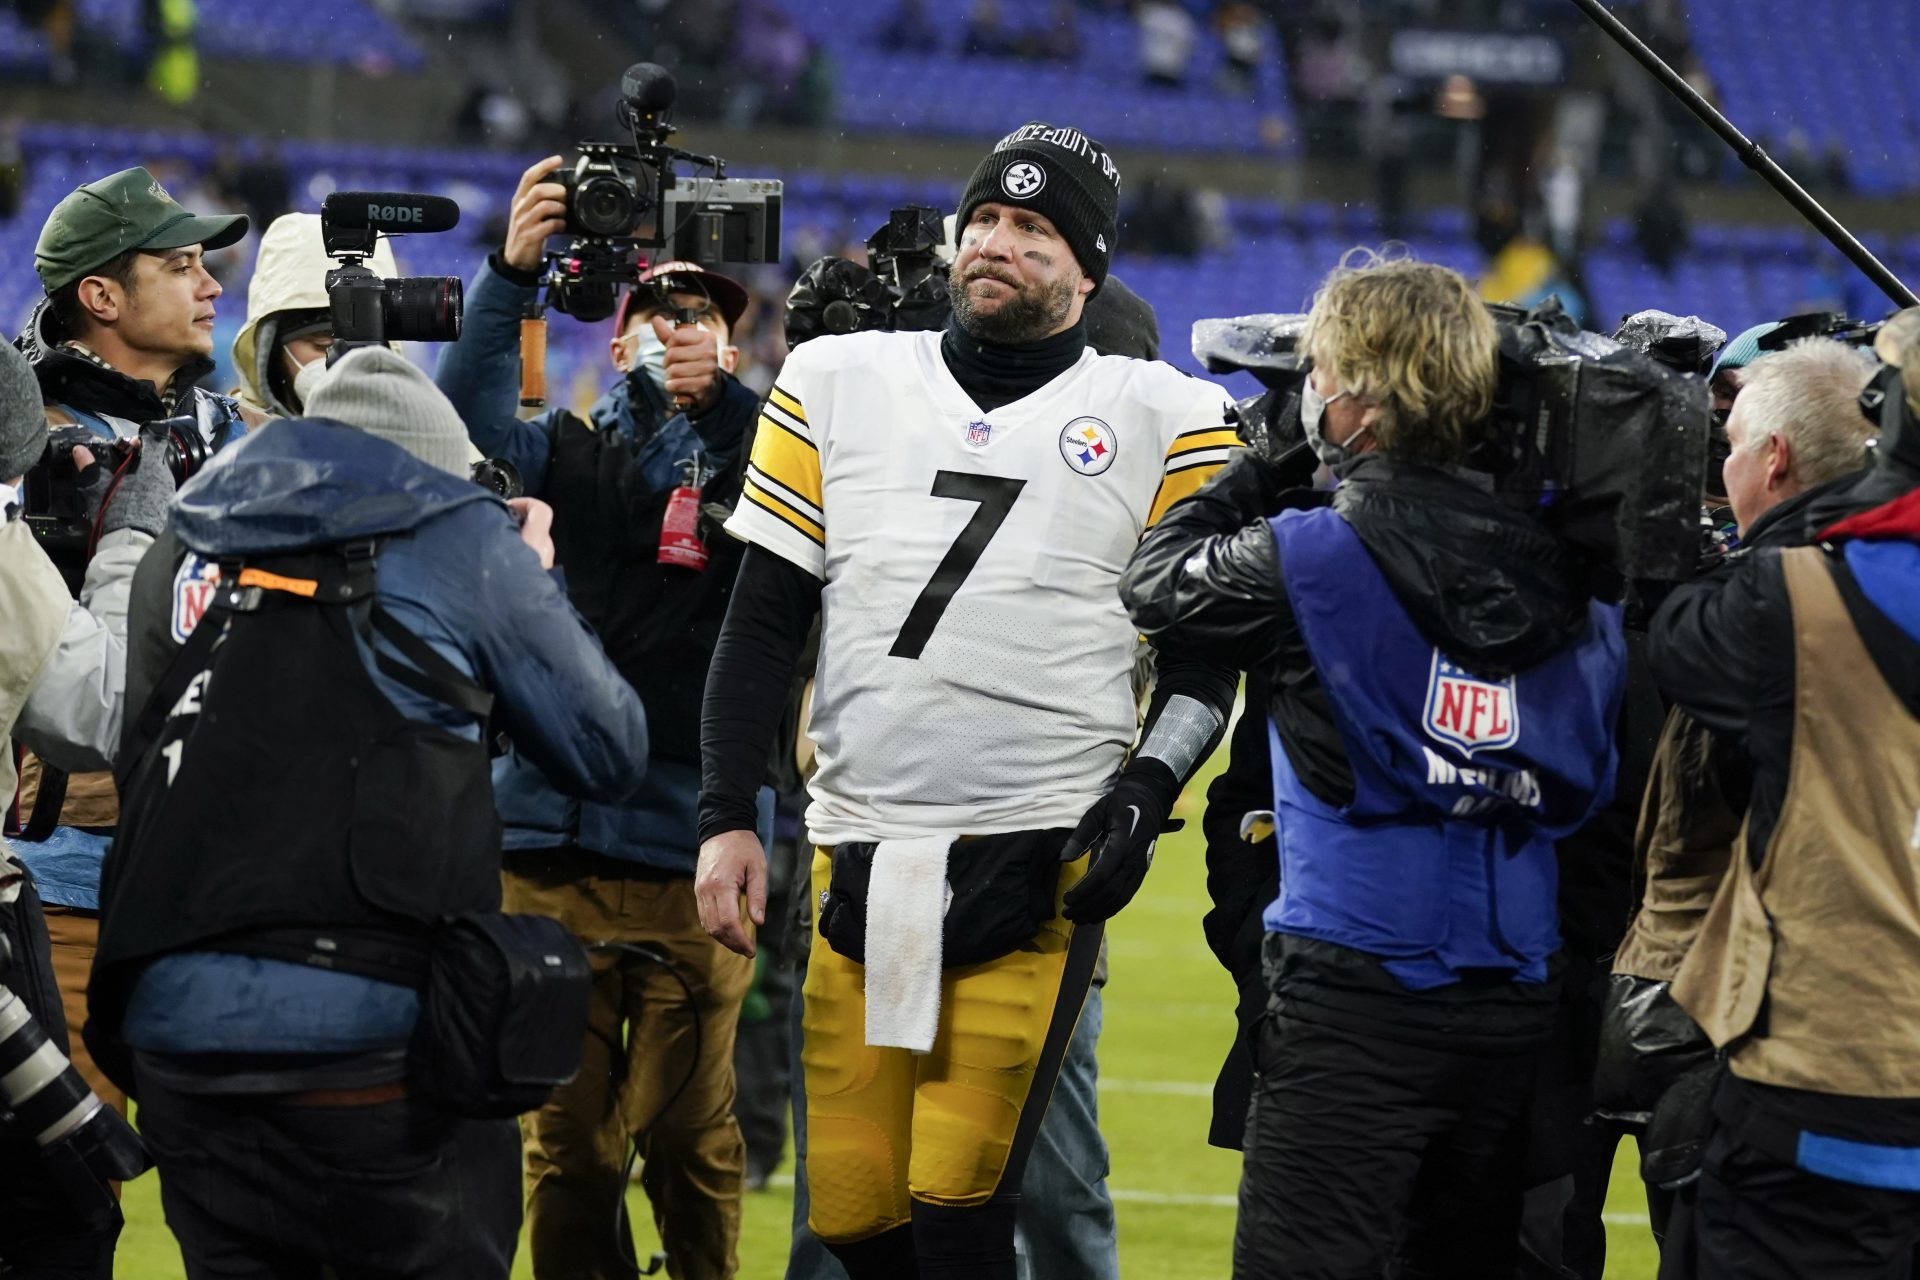 Pittsburgh Steelers quarterback Ben Roethlisberger (7) walks off the field after an NFL football game against the Baltimore Ravens, Sunday, Jan. 9, 2022, in Baltimore. The Steelers won 16-13.